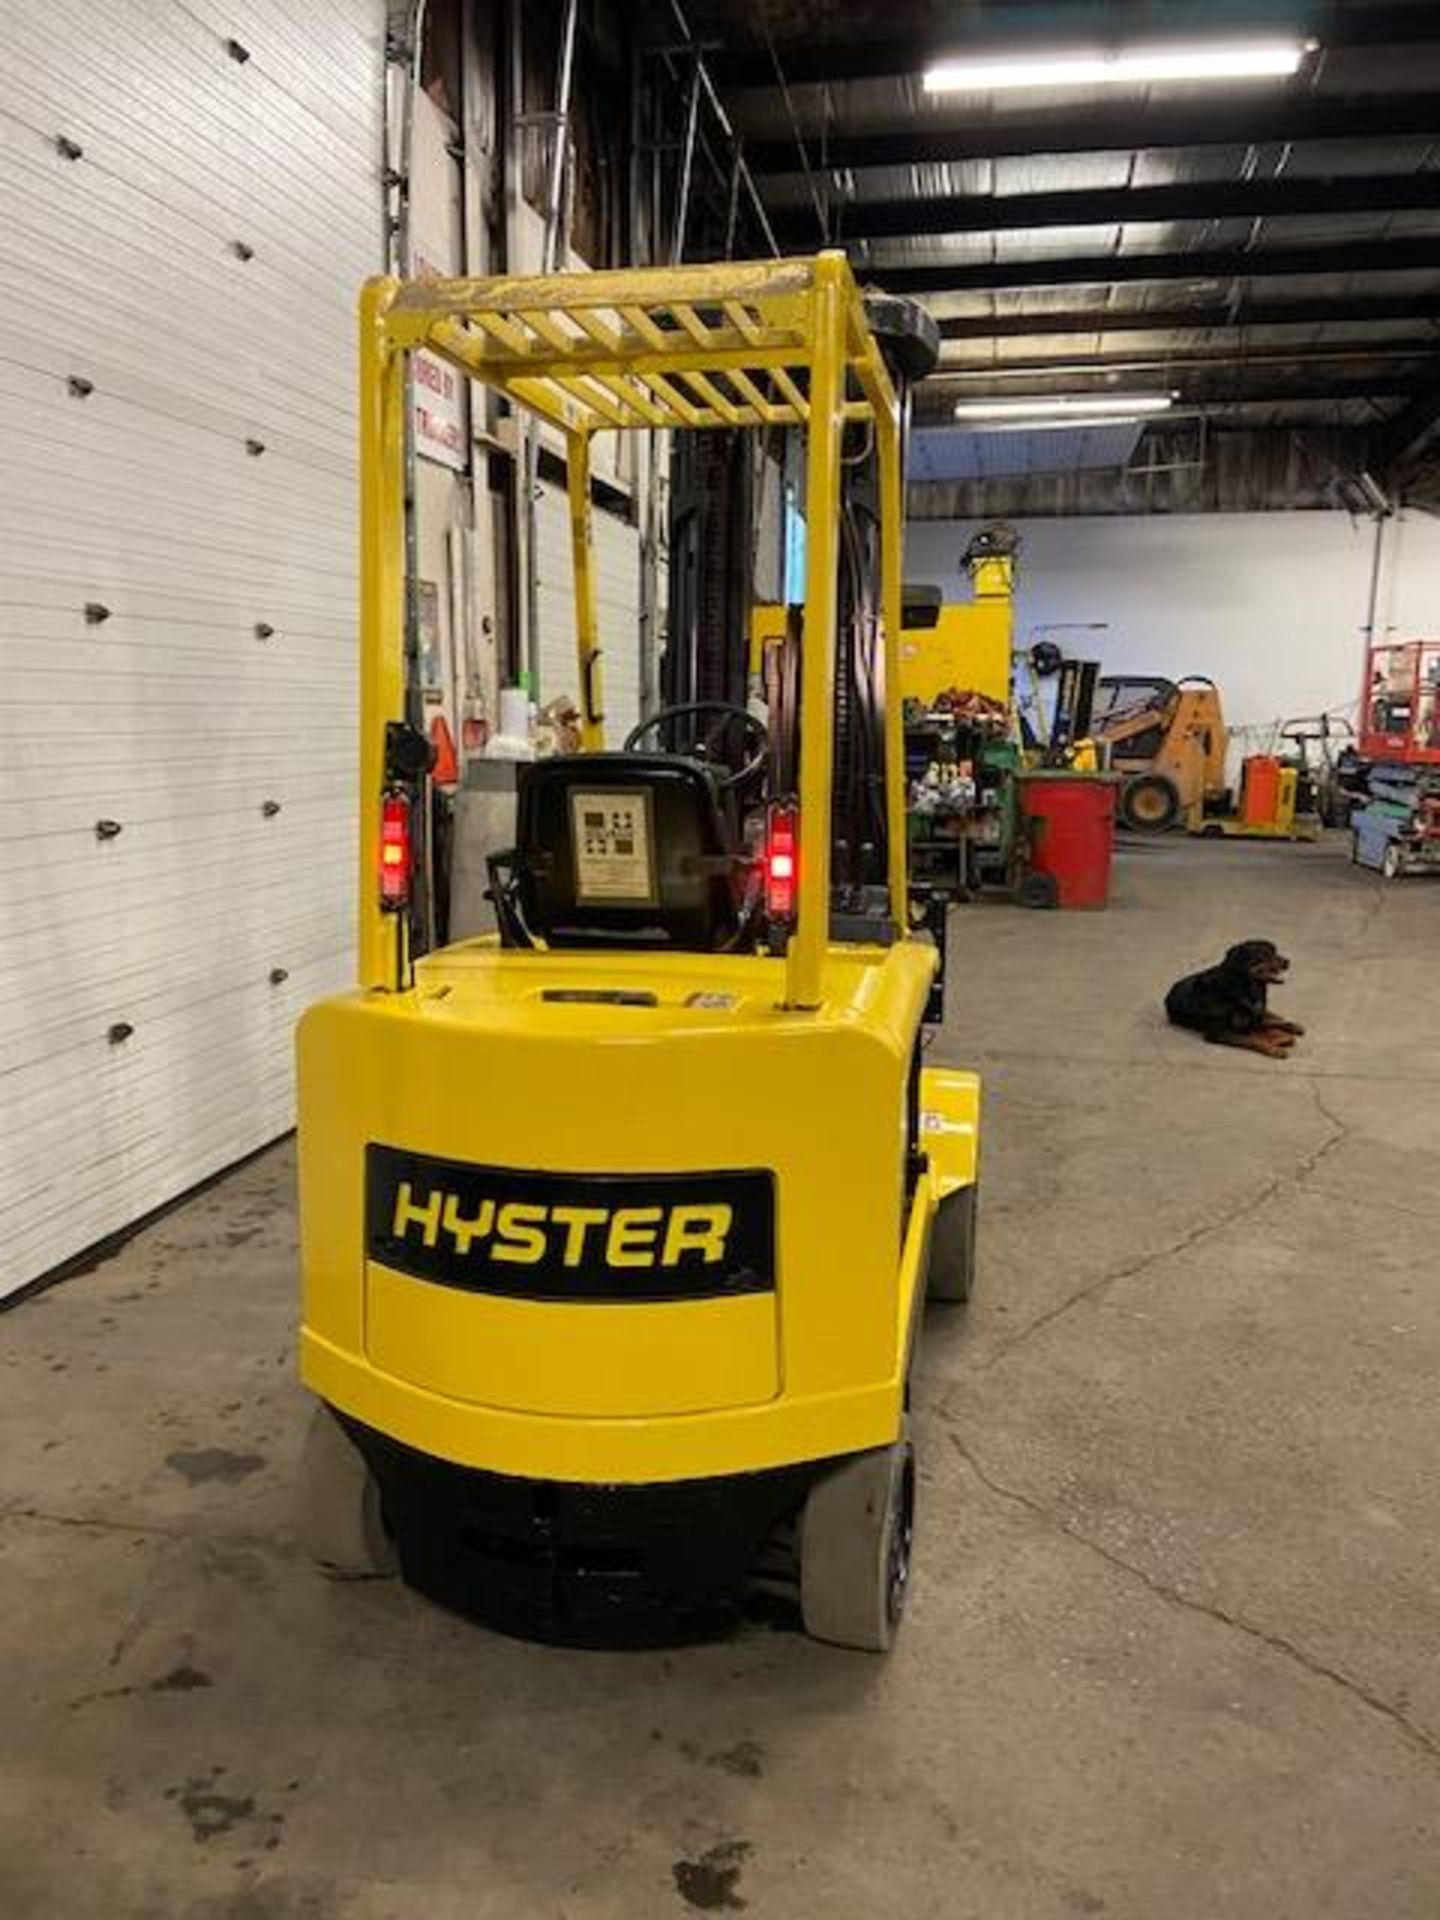 FREE CUSTOMS - Hyster 6500lbs Capacity Forklift Electric with sideshift and 4-STAGE mast with LOW - Image 3 of 3